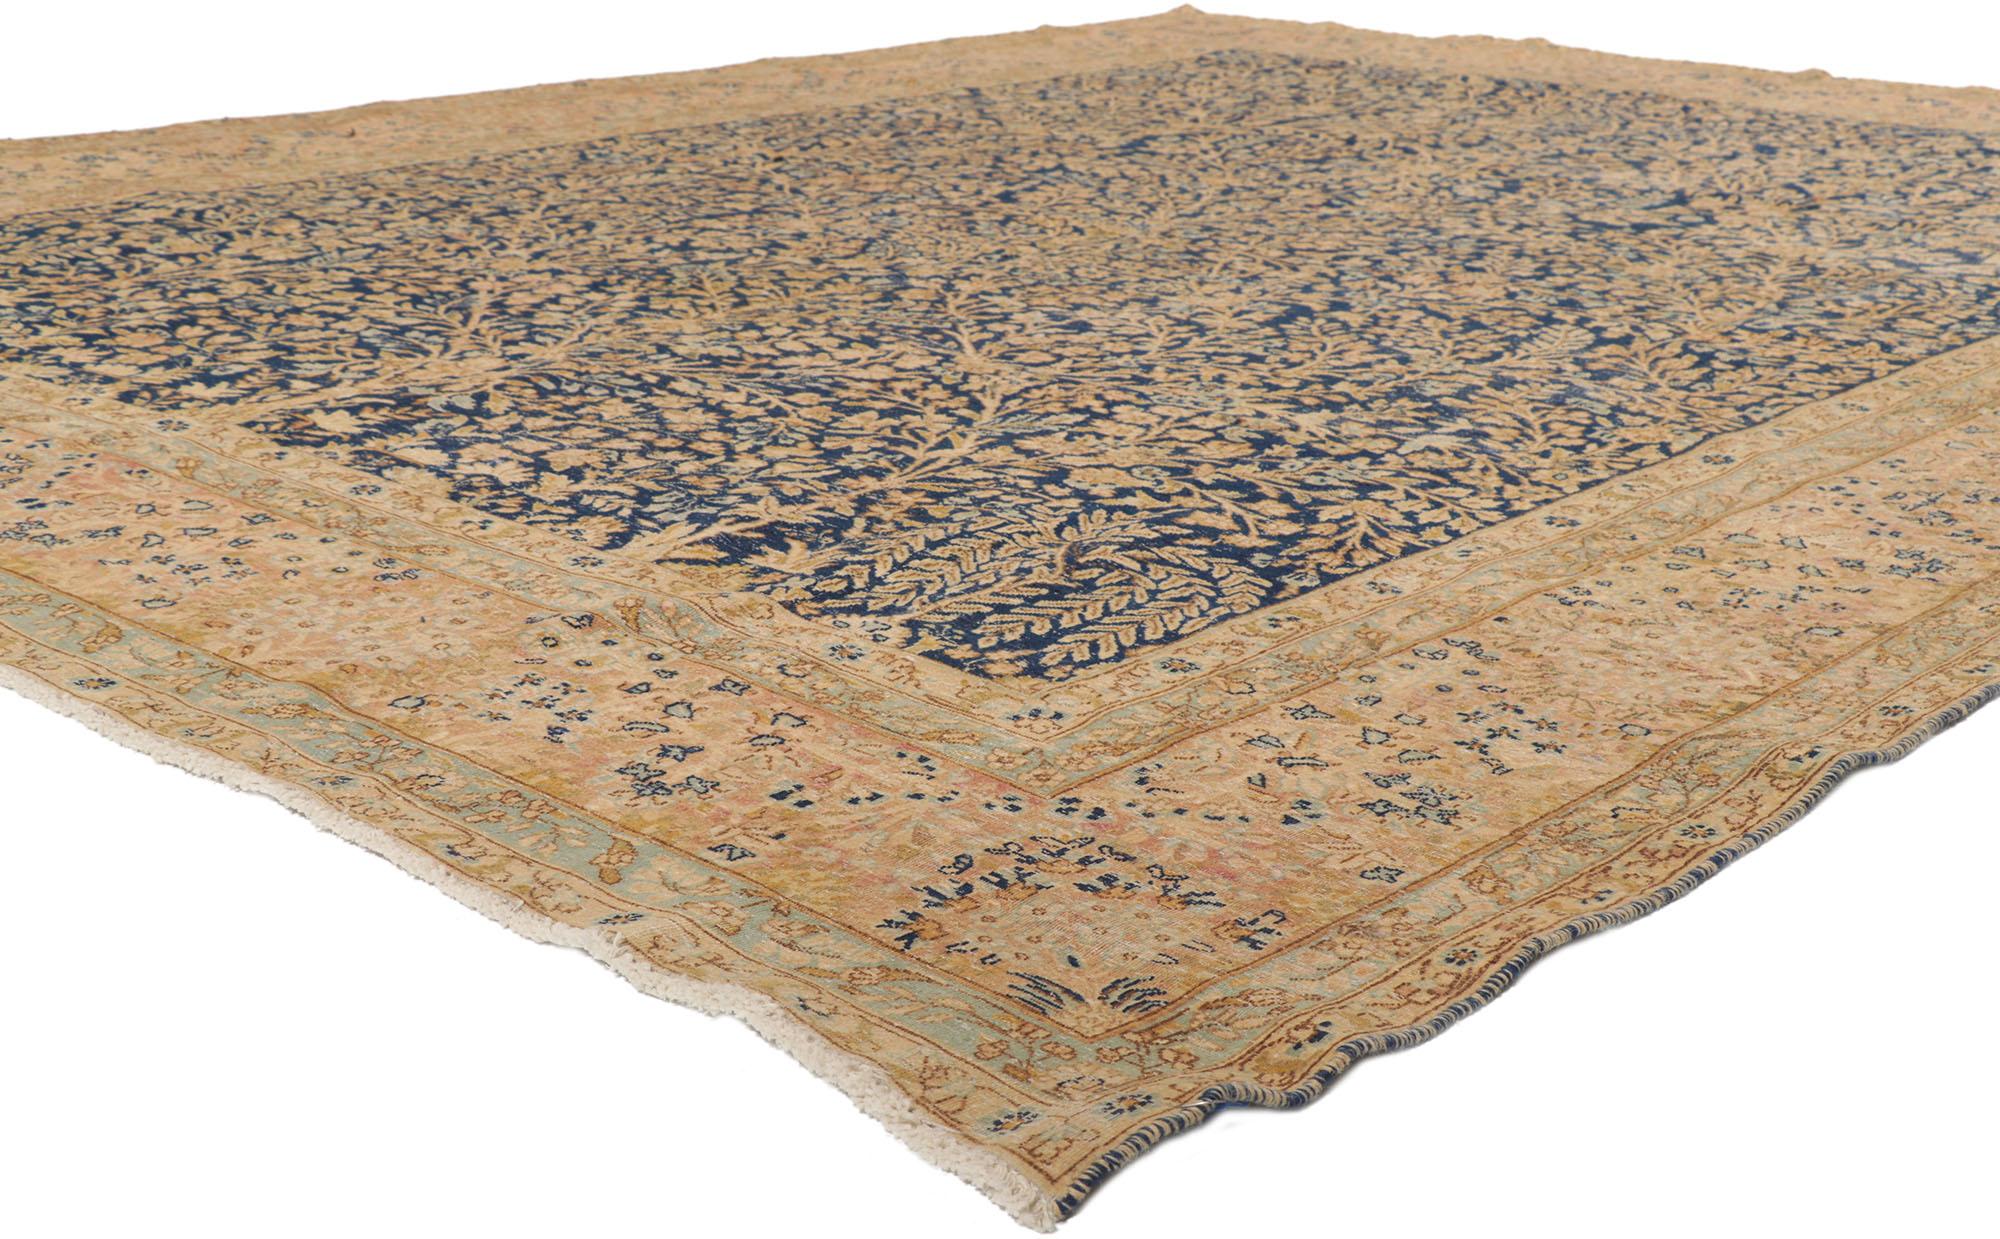 53732 Distressed Antique Persian Kerman Rug with Millefleur Design 08'08 x 11'05. With a traditional floral design and rugged beauty, this hand-knotted wool distressed antique Persian Kerman rug beautifully highlights nostalgic charm. The lovingly